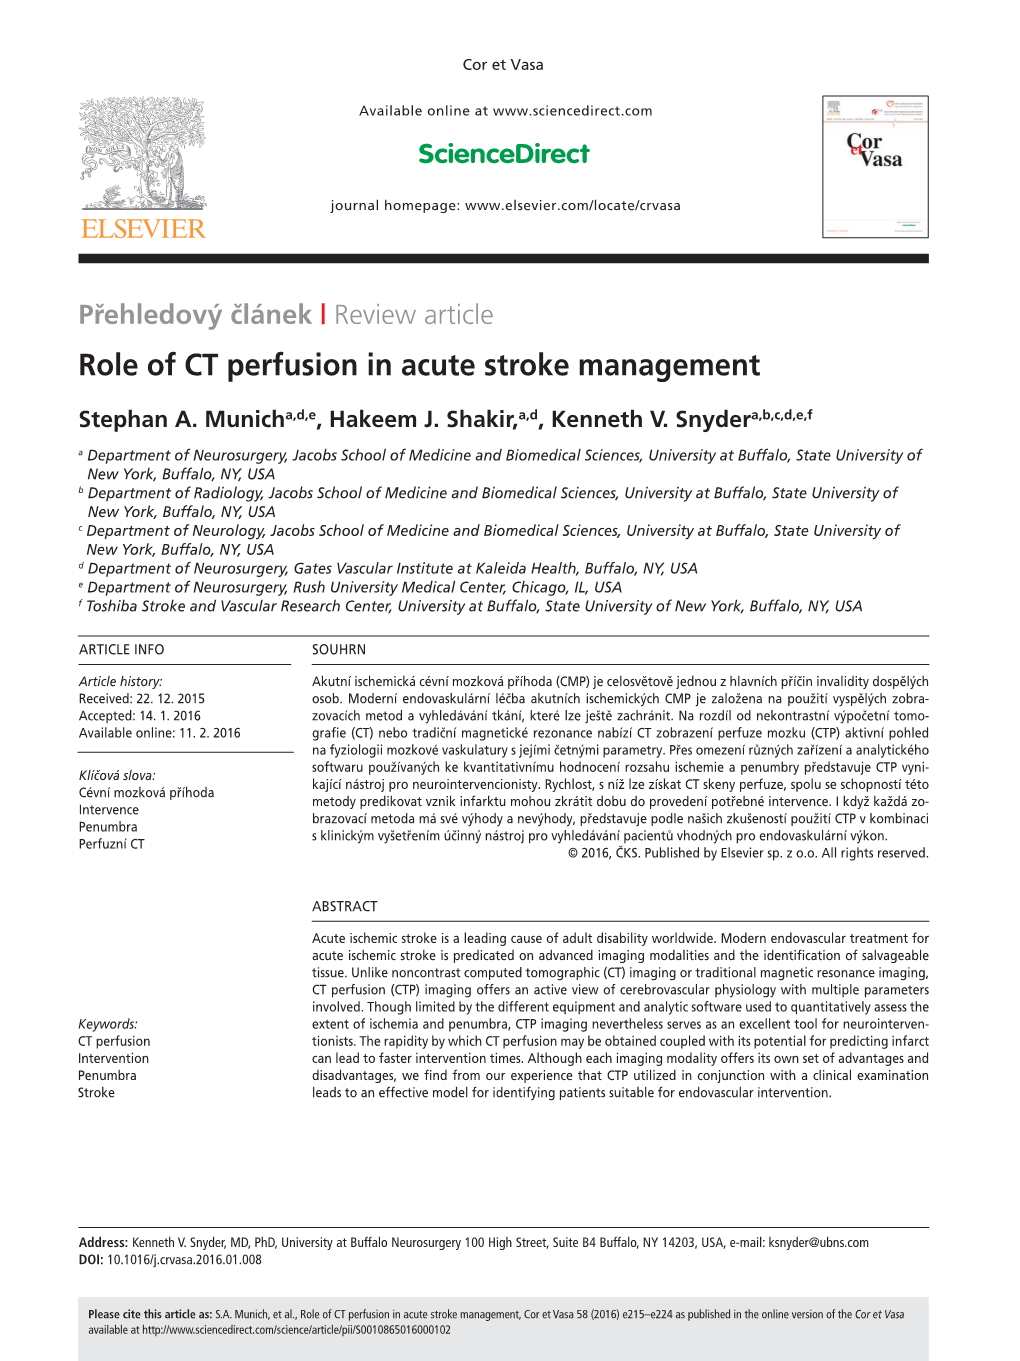 Role of CT Perfusion in Acute Stroke Management